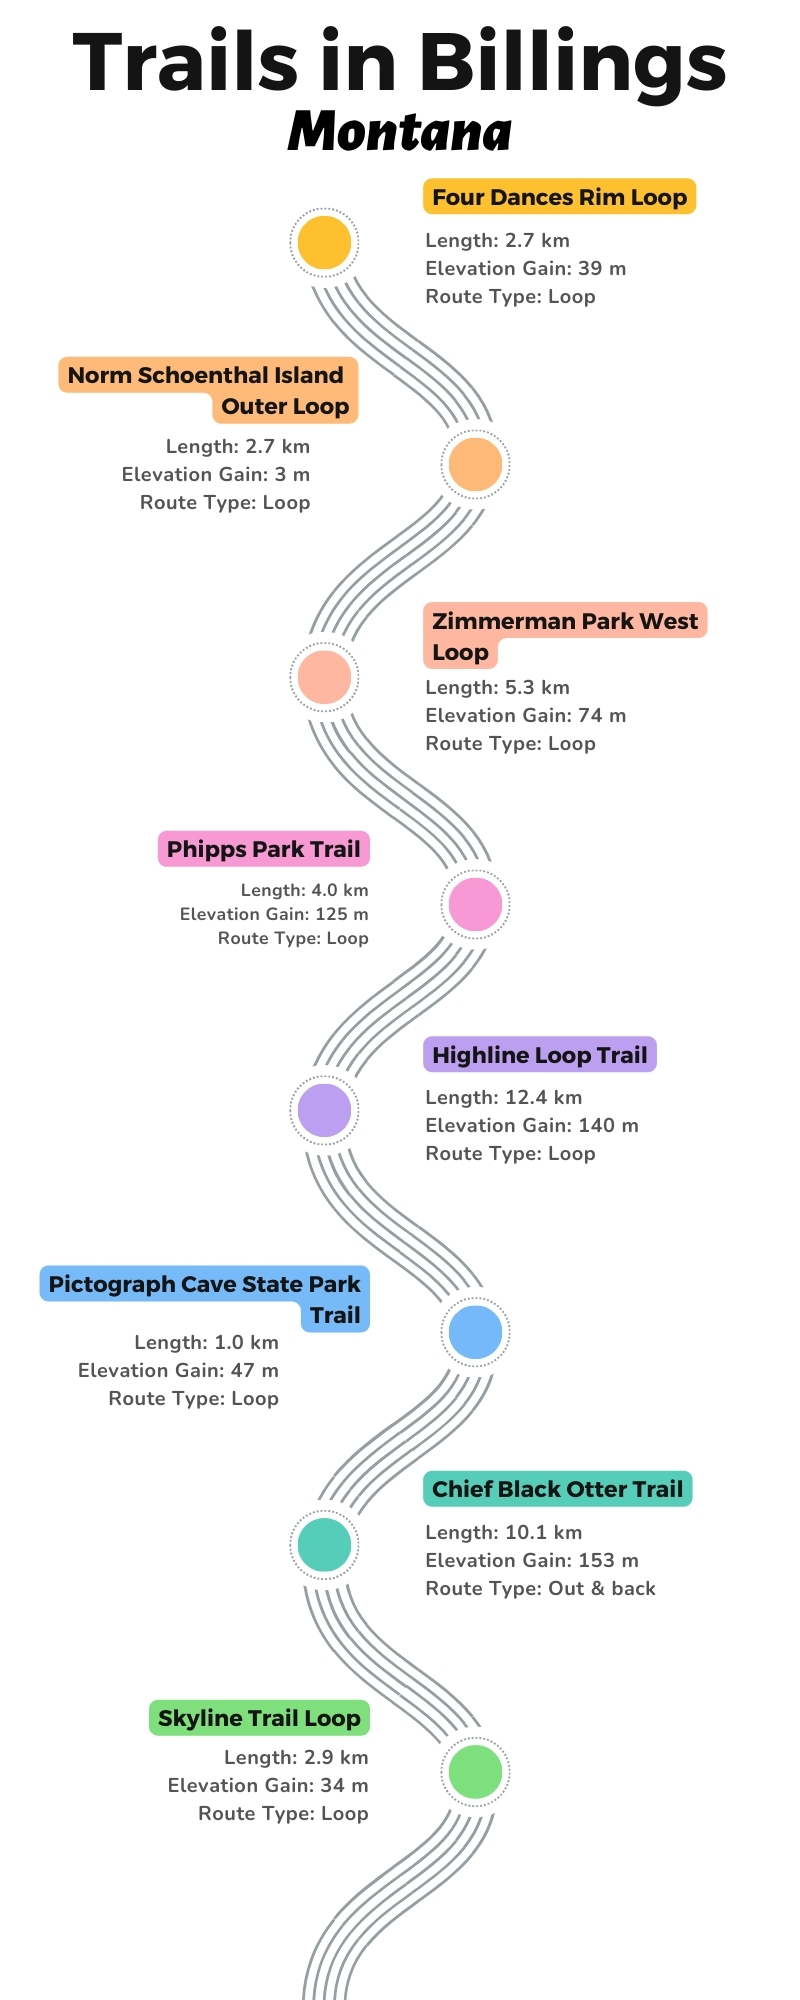 Trails in Billings Montana infographic